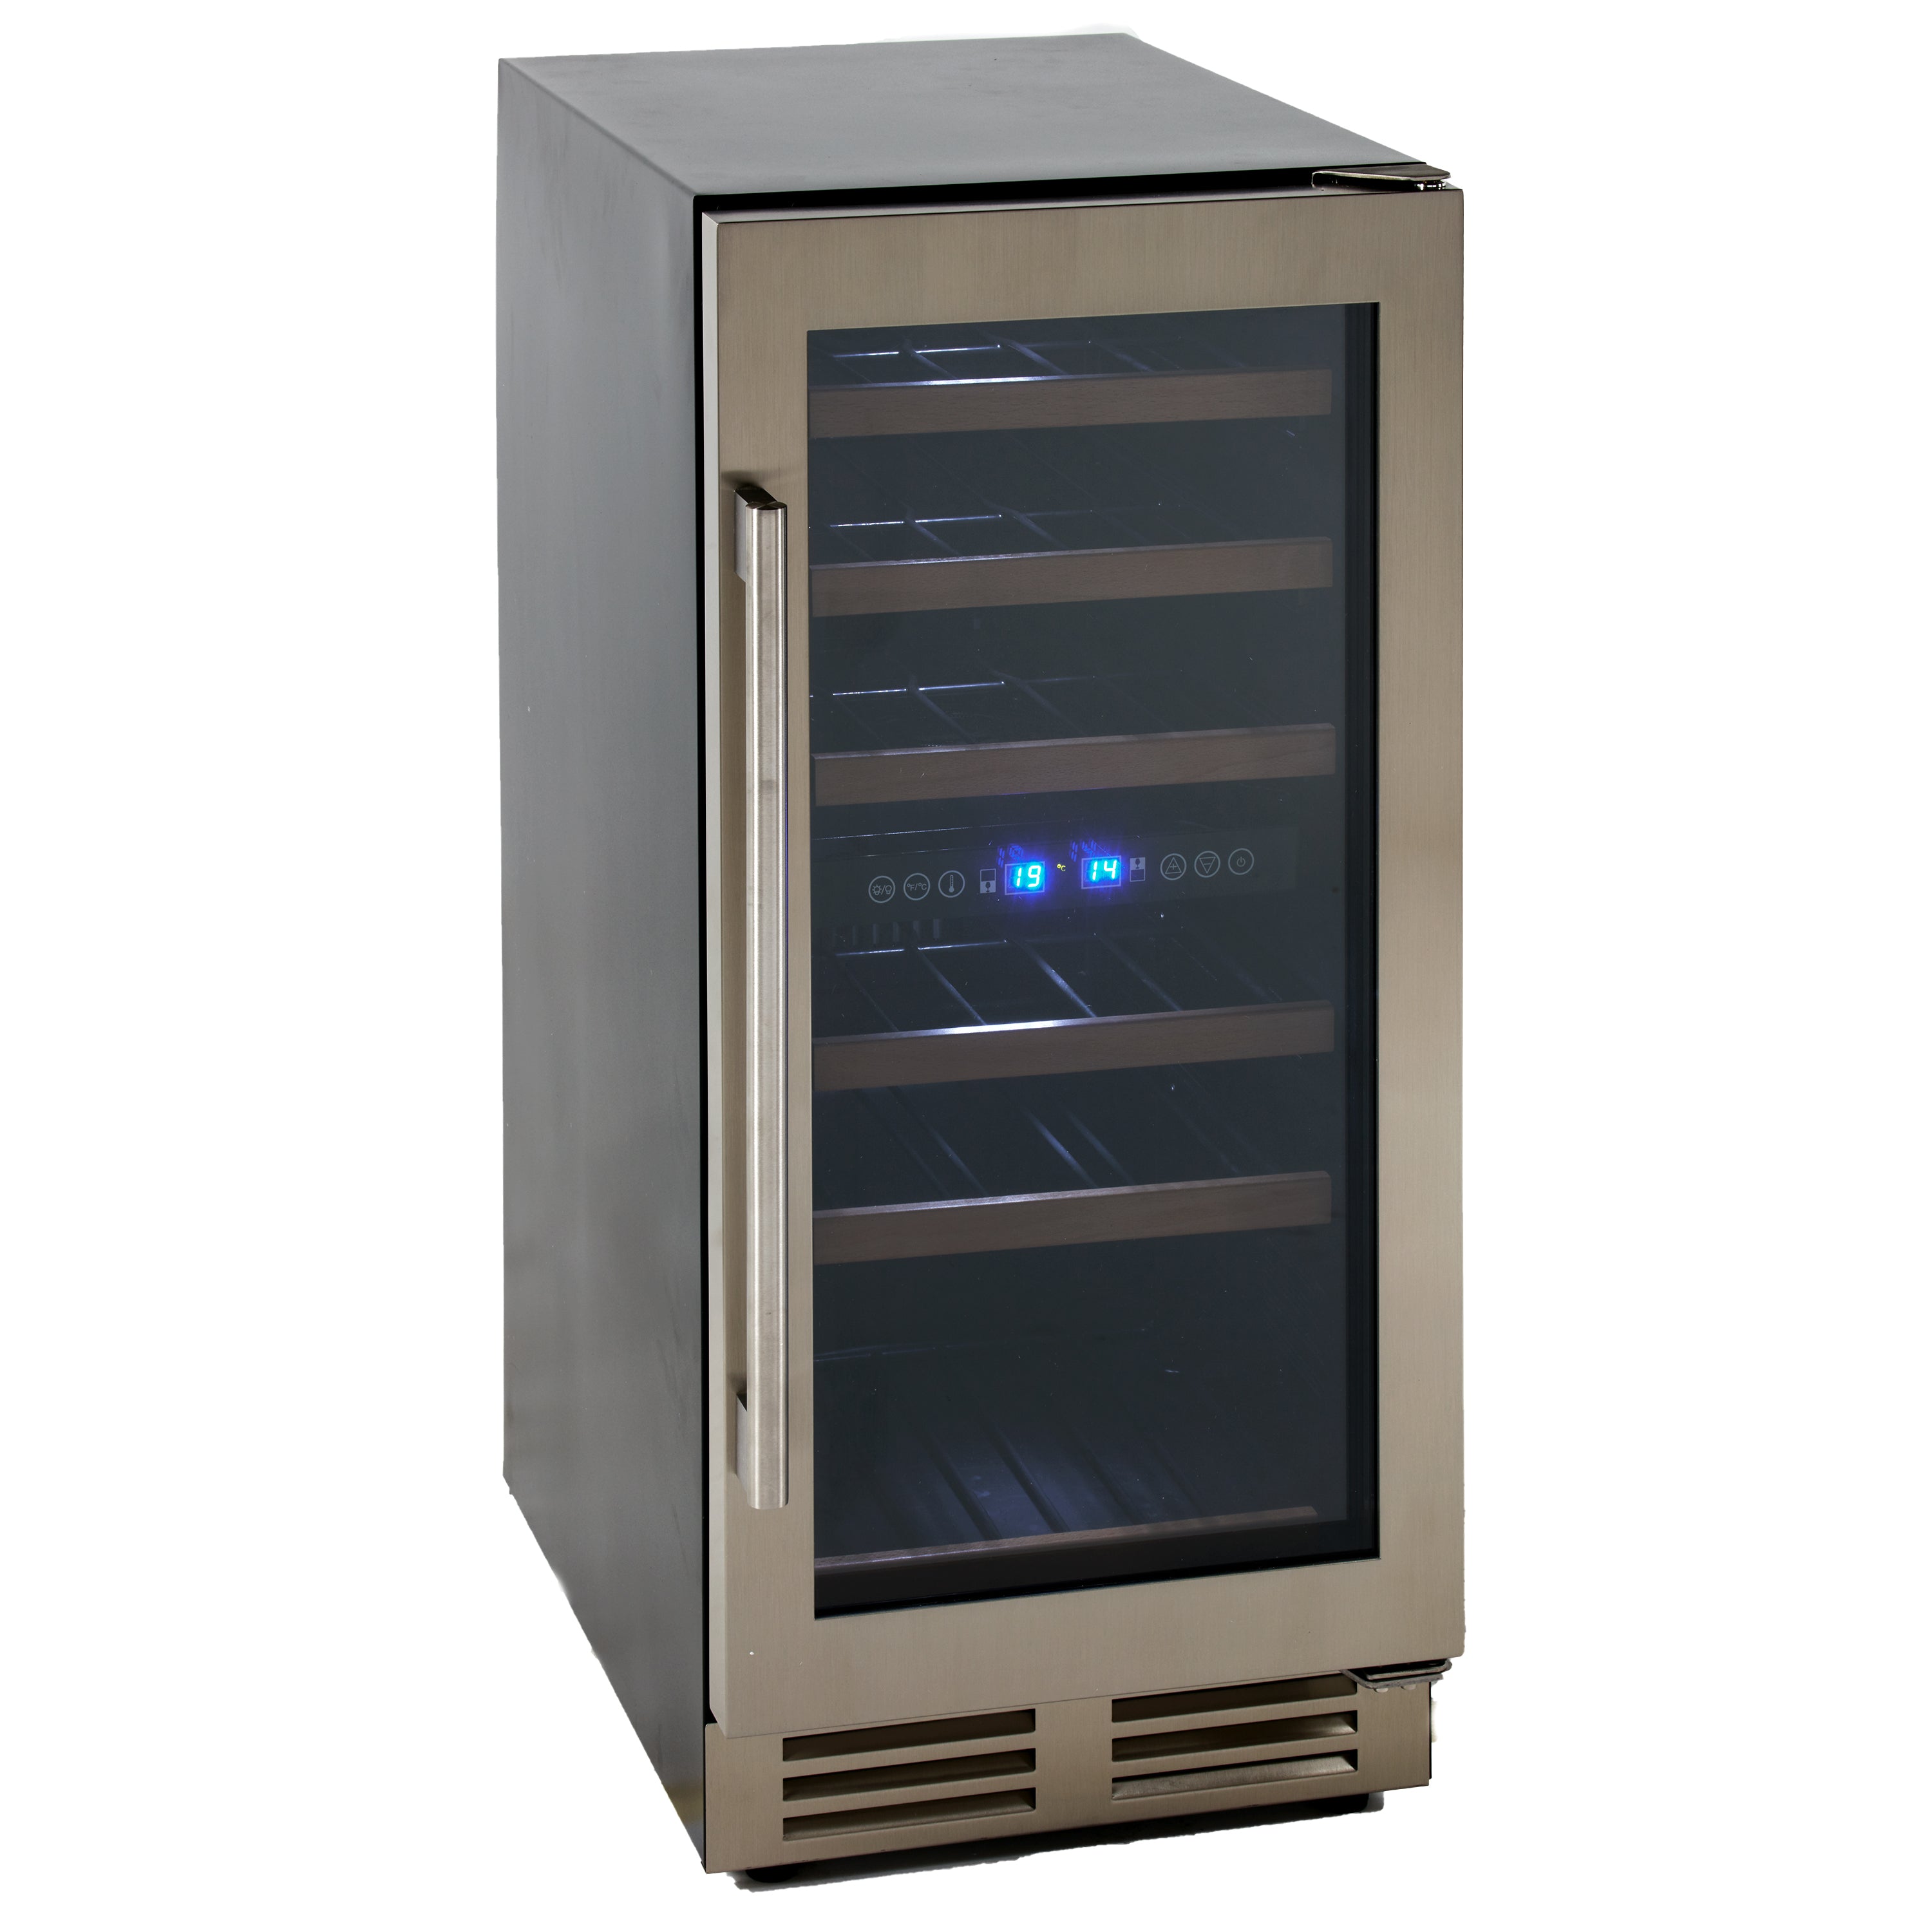 Avanti - WCF282E3SD, Avanti DESIGNER Series Dual-Zone Wine Cooler, 28 Bottle Capacity, in Stainless Steel with Wood Accent Shelving